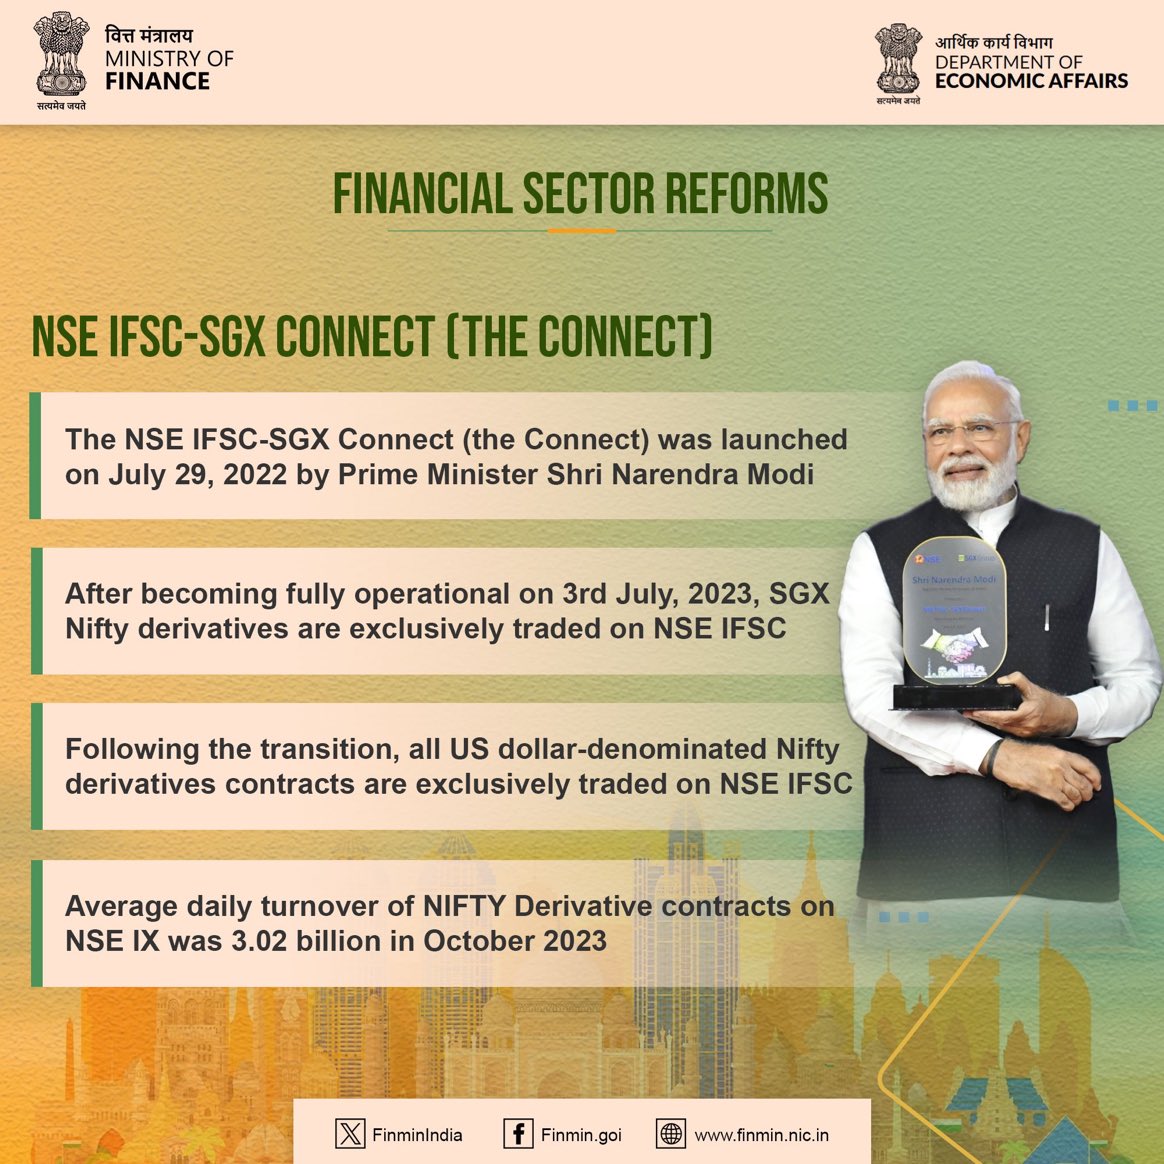 In a major financial sector reform, Prime Minister Shri @narendramodi launched NSE IFSC-SGX Connect on July 29, 2022 at the International Financial Service Centre (IFSC) in GIFT City, in Gujarat’s #Gandhinagar.

#ViksitBharat #FinMinReview2023